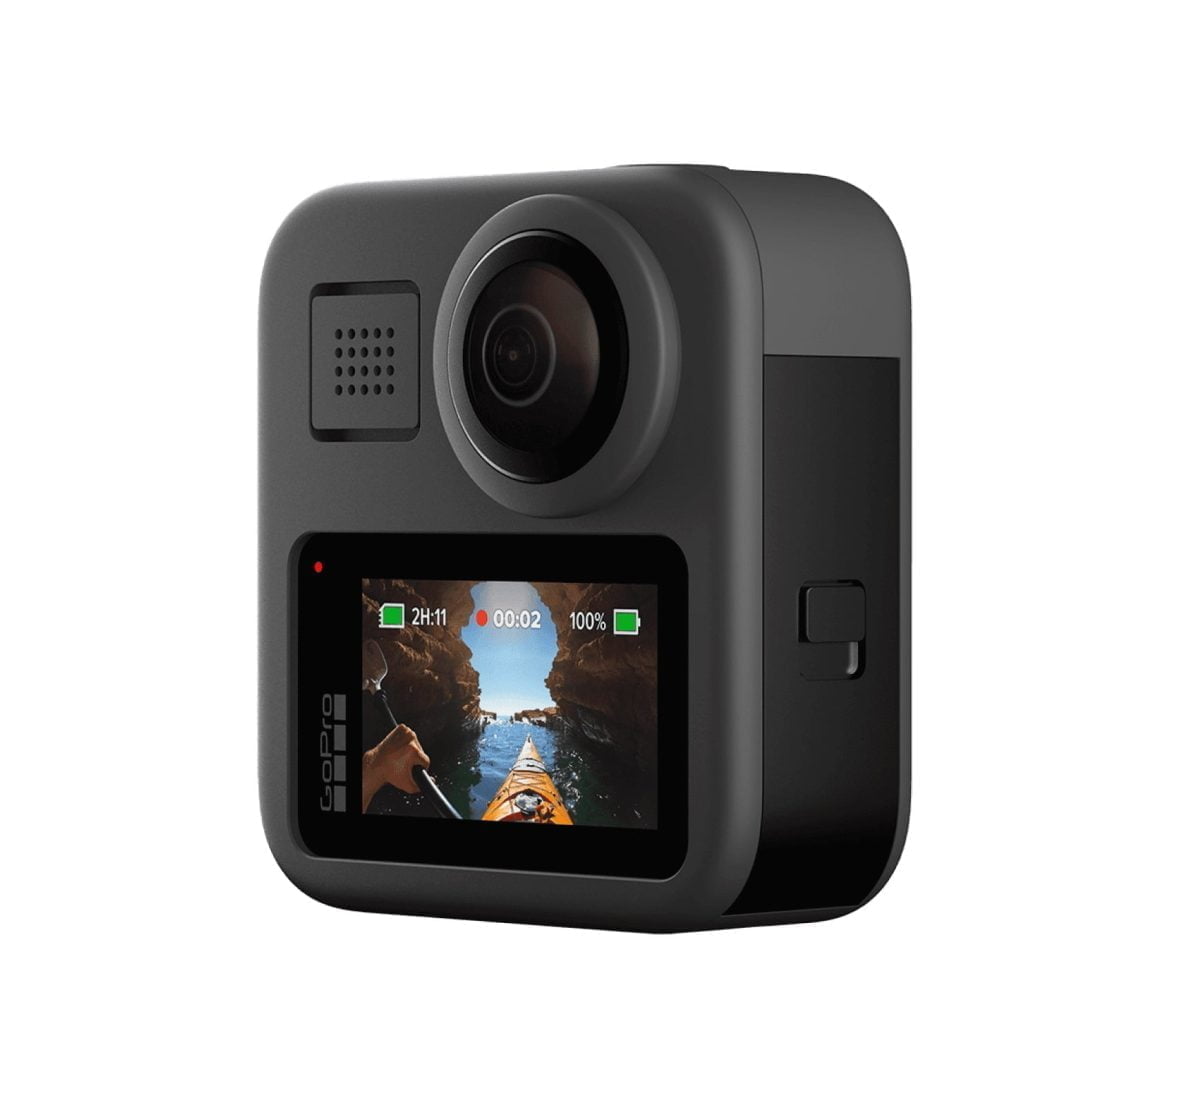 Pdp Max Gallery Angle1 1920 Gopro &Lt;H1&Gt;Gopro Max - Waterproof 360 Digital Action Camera With Unbreakable Stabilization, Touch Screen And Voice Control - Live Hd Streaming&Lt;/H1&Gt; &Lt;Div Class=&Quot;Descriptionmodule_Bundles-Container__Skafo Col-Xlarge-6 Col-Large-6 Col-Medium-4 Col-Small-4 Col-Xsmall-8&Quot;&Gt; &Lt;Div Class=&Quot;Descriptionmodule_Detailslist__321Ps&Quot;&Gt; &Lt;P Class=&Quot;Header Header-5&Quot;&Gt;Product Details&Lt;/P&Gt; &Lt;Div Class=&Quot;Row Descriptionmodule_Bundles__3Ah0V Descriptionmodule_Detailitem__1Q3Hp&Quot;&Gt; &Lt;Ul&Gt; &Lt;Li Class=&Quot;Paragraph Paragraph-Small&Quot;&Gt;Shoot Hero Mode Or Go With 360 Mode For Stunning 6K.⁵&Lt;/Li&Gt; &Lt;Li Class=&Quot;Paragraph Paragraph-Small&Quot;&Gt;Unbreakable Stabilization From Max Hypersmooth&Lt;/Li&Gt; &Lt;Li Class=&Quot;Paragraph Paragraph-Small&Quot;&Gt;Waterproof To 16Ft + Built Tough&Lt;/Li&Gt; &Lt;Li Class=&Quot;Paragraph Paragraph-Small&Quot;&Gt;Premium 360 + Stereo Audio From 6 Mics&Lt;/Li&Gt; &Lt;Li Class=&Quot;Paragraph Paragraph-Small&Quot;&Gt;Vlog To The Max With 1080P Live Streaming&Lt;/Li&Gt; &Lt;Li Class=&Quot;Paragraph Paragraph-Small&Quot;&Gt;Max Timewarp, Powerpano, 4 Digital Lenses + So Many Other Features To Nail Any Shot&Lt;/Li&Gt; &Lt;Li Class=&Quot;Paragraph Paragraph-Small&Quot;&Gt;Compatible With Quik App&Lt;/Li&Gt; &Lt;Li Class=&Quot;Paragraph Paragraph-Small&Quot;&Gt;Compatible With Over 30 Mounts + Accessories&Lt;/Li&Gt; &Lt;/Ul&Gt; &Lt;/Div&Gt; &Lt;/Div&Gt; &Lt;/Div&Gt; &Nbsp; Gopro Max Gopro Max - Waterproof 360 Digital Action Camera With Unbreakable Stabilization, Touch Screen And Voice Control - Live Hd Streaming